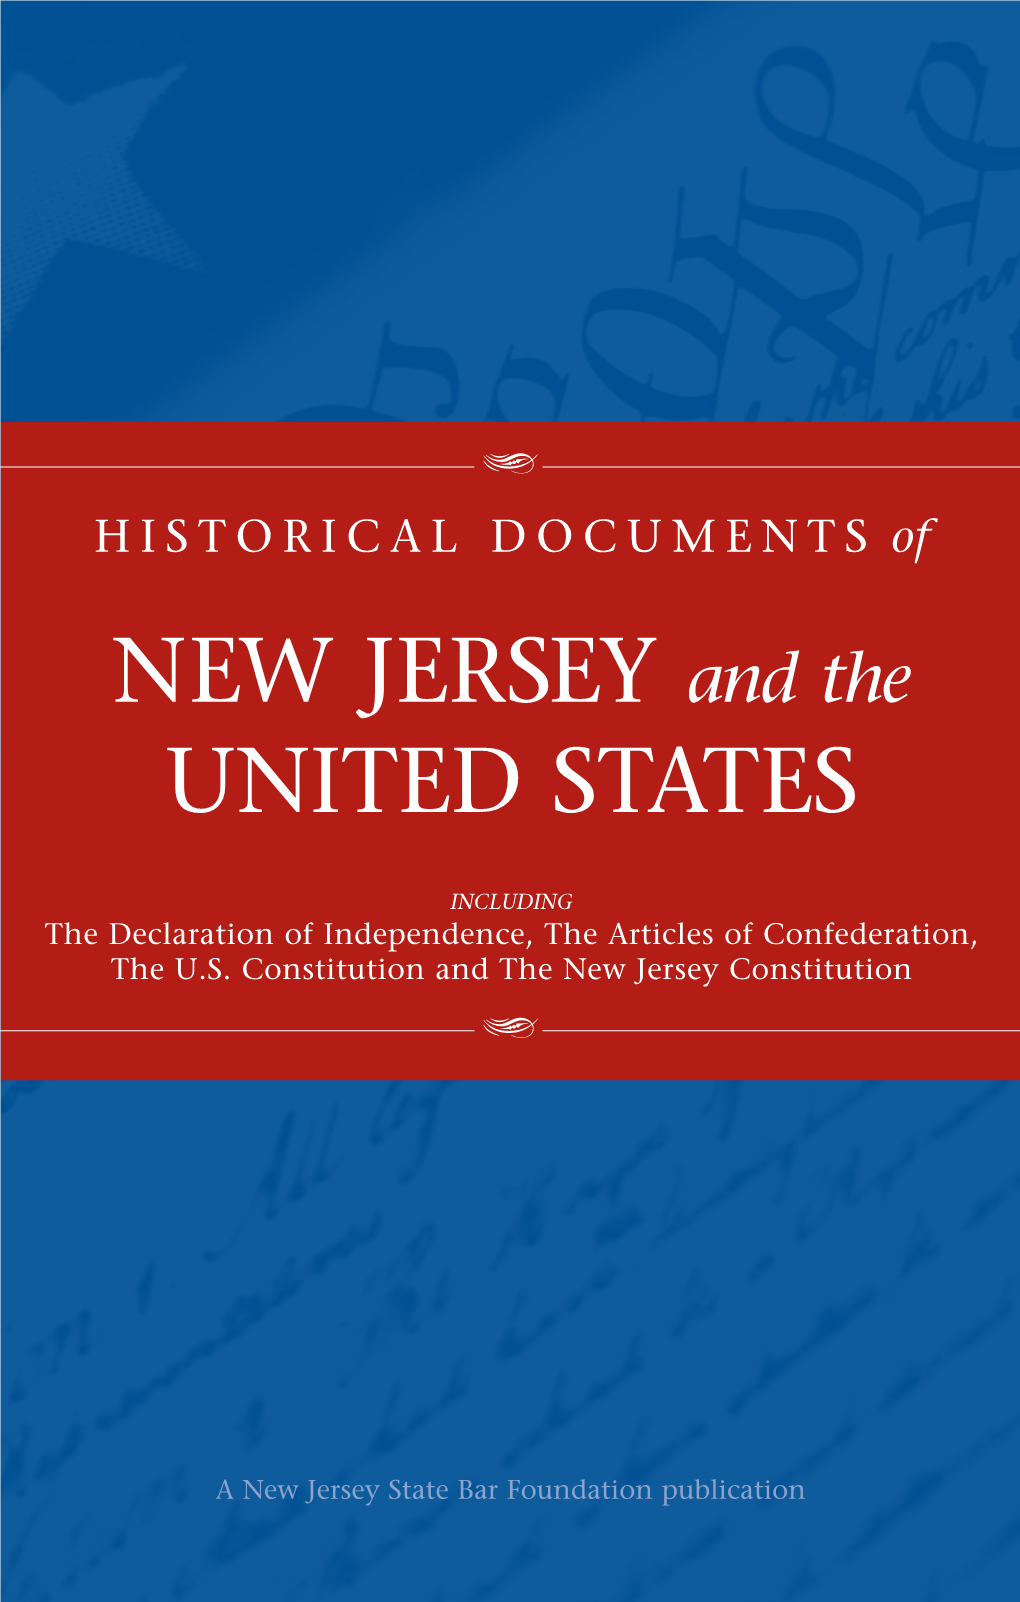 NEW JERSEY and the UNITED STATES